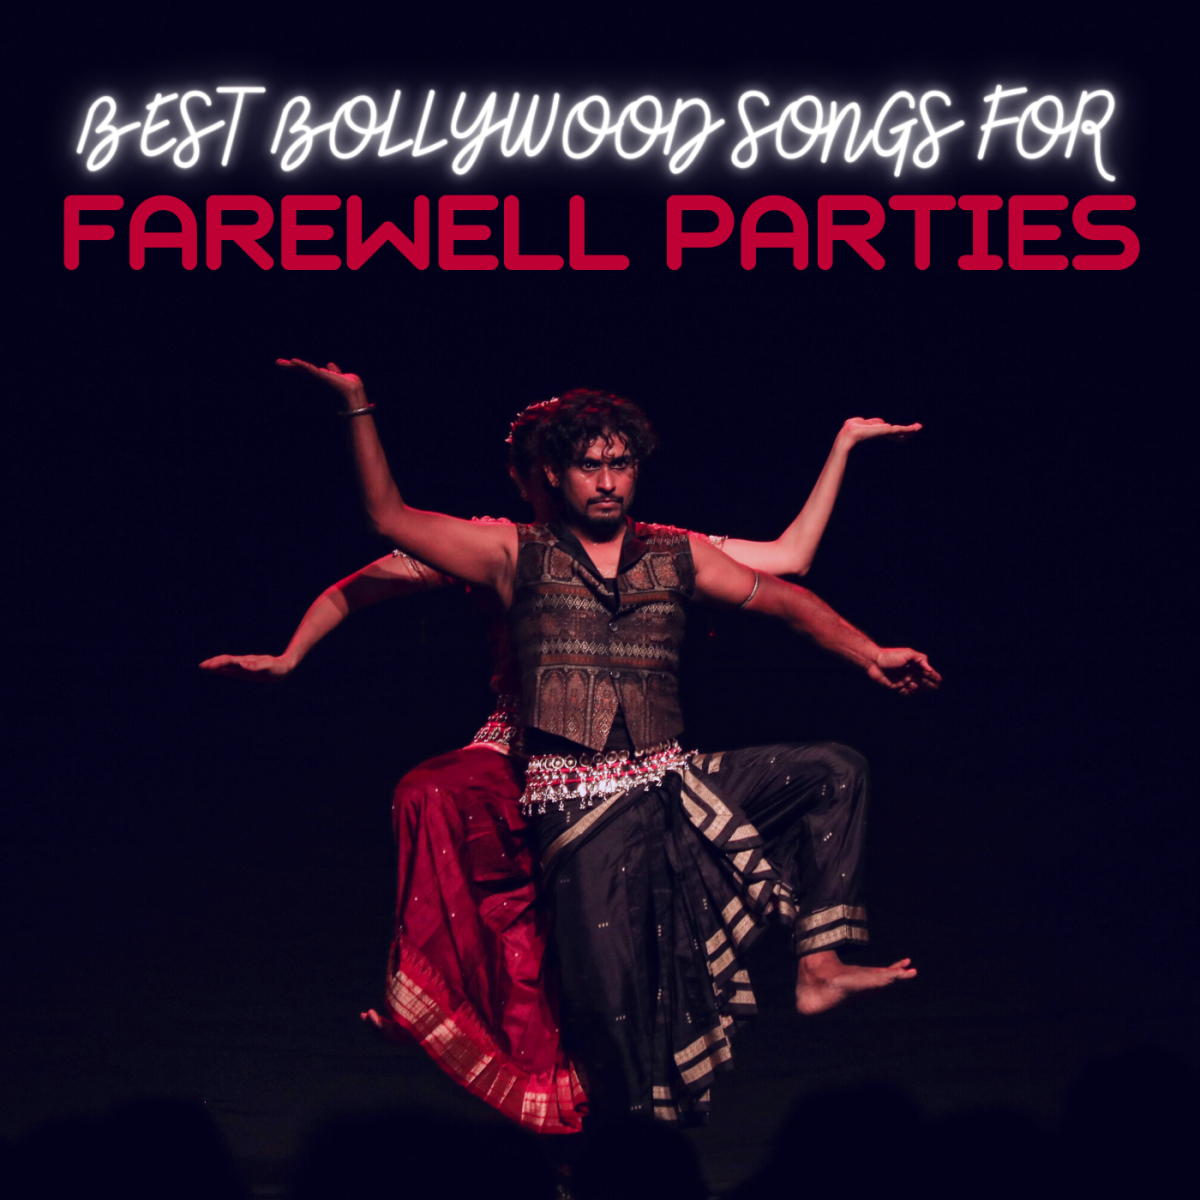 Throwing a goodbye party? These songs are perfect for you.